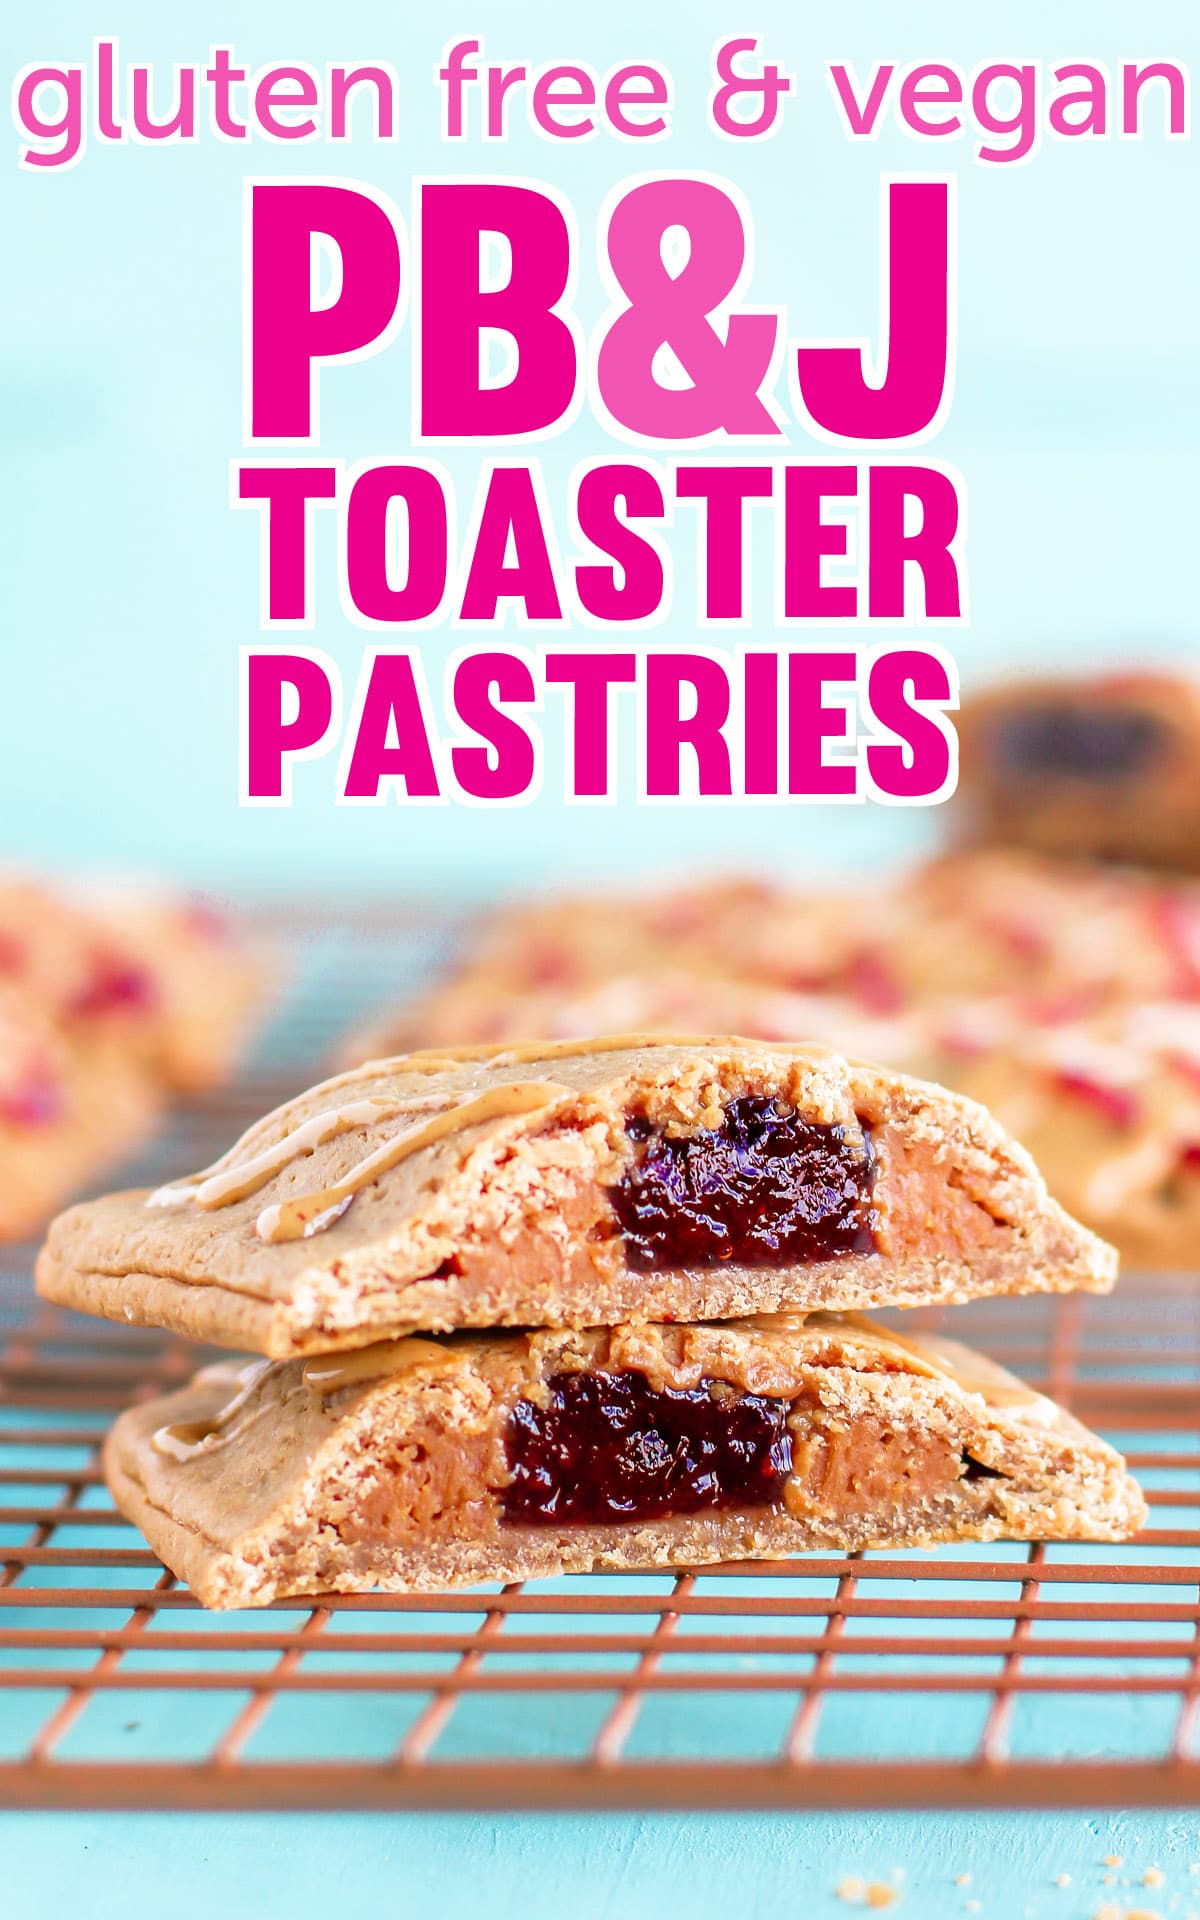 Homemade Peanut Butter and Jelly Toaster Pastries (gluten free, high protein, made with less sugar)